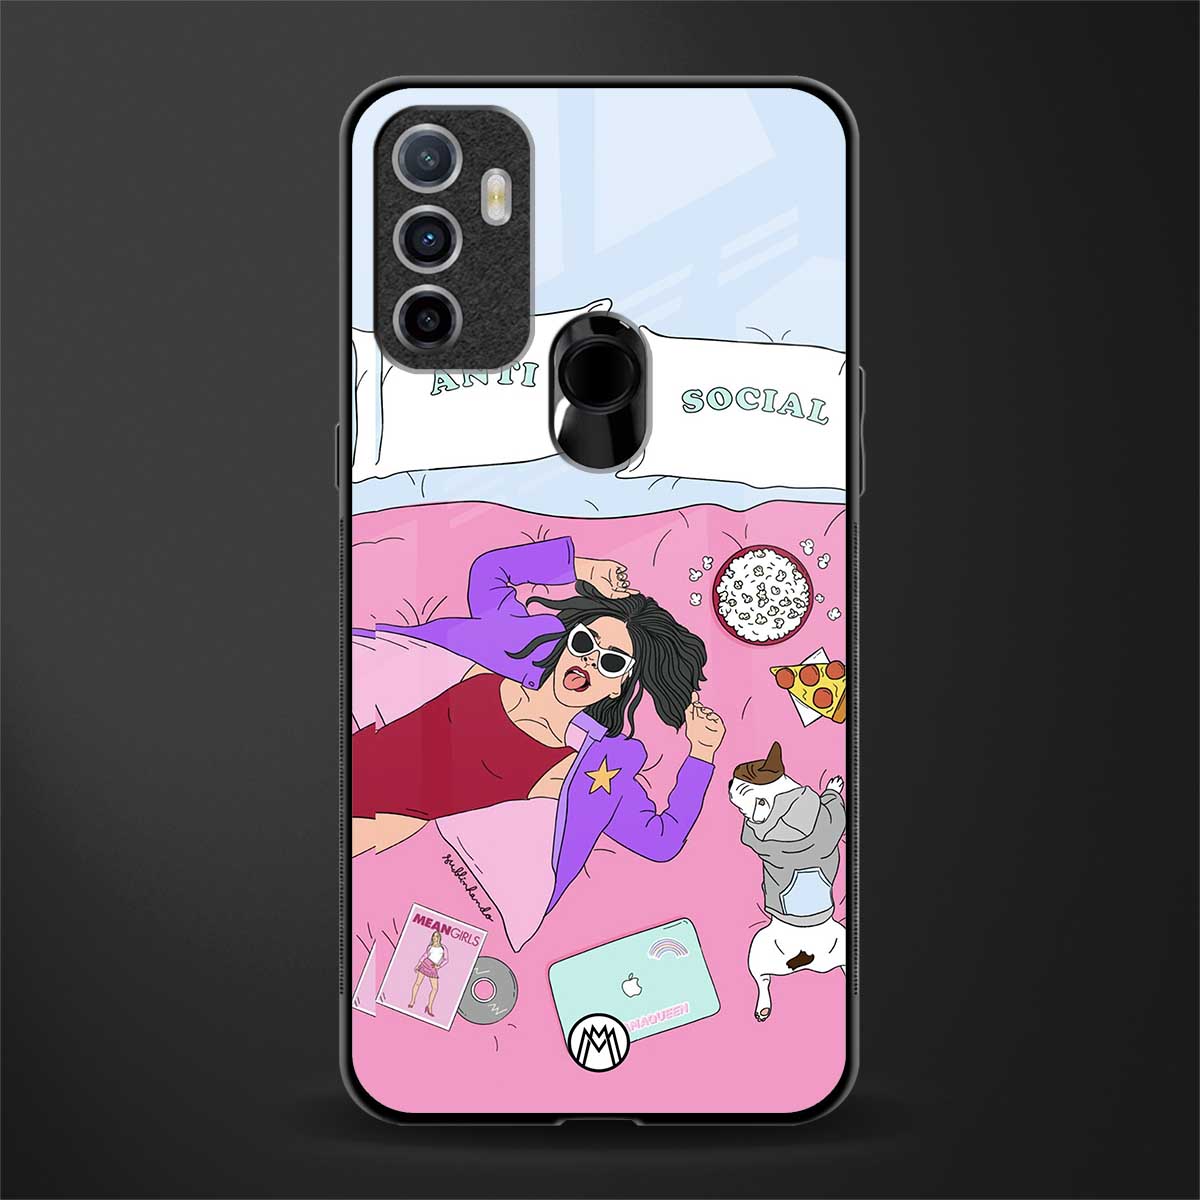 anti social chick girl glass case for oppo a53 image